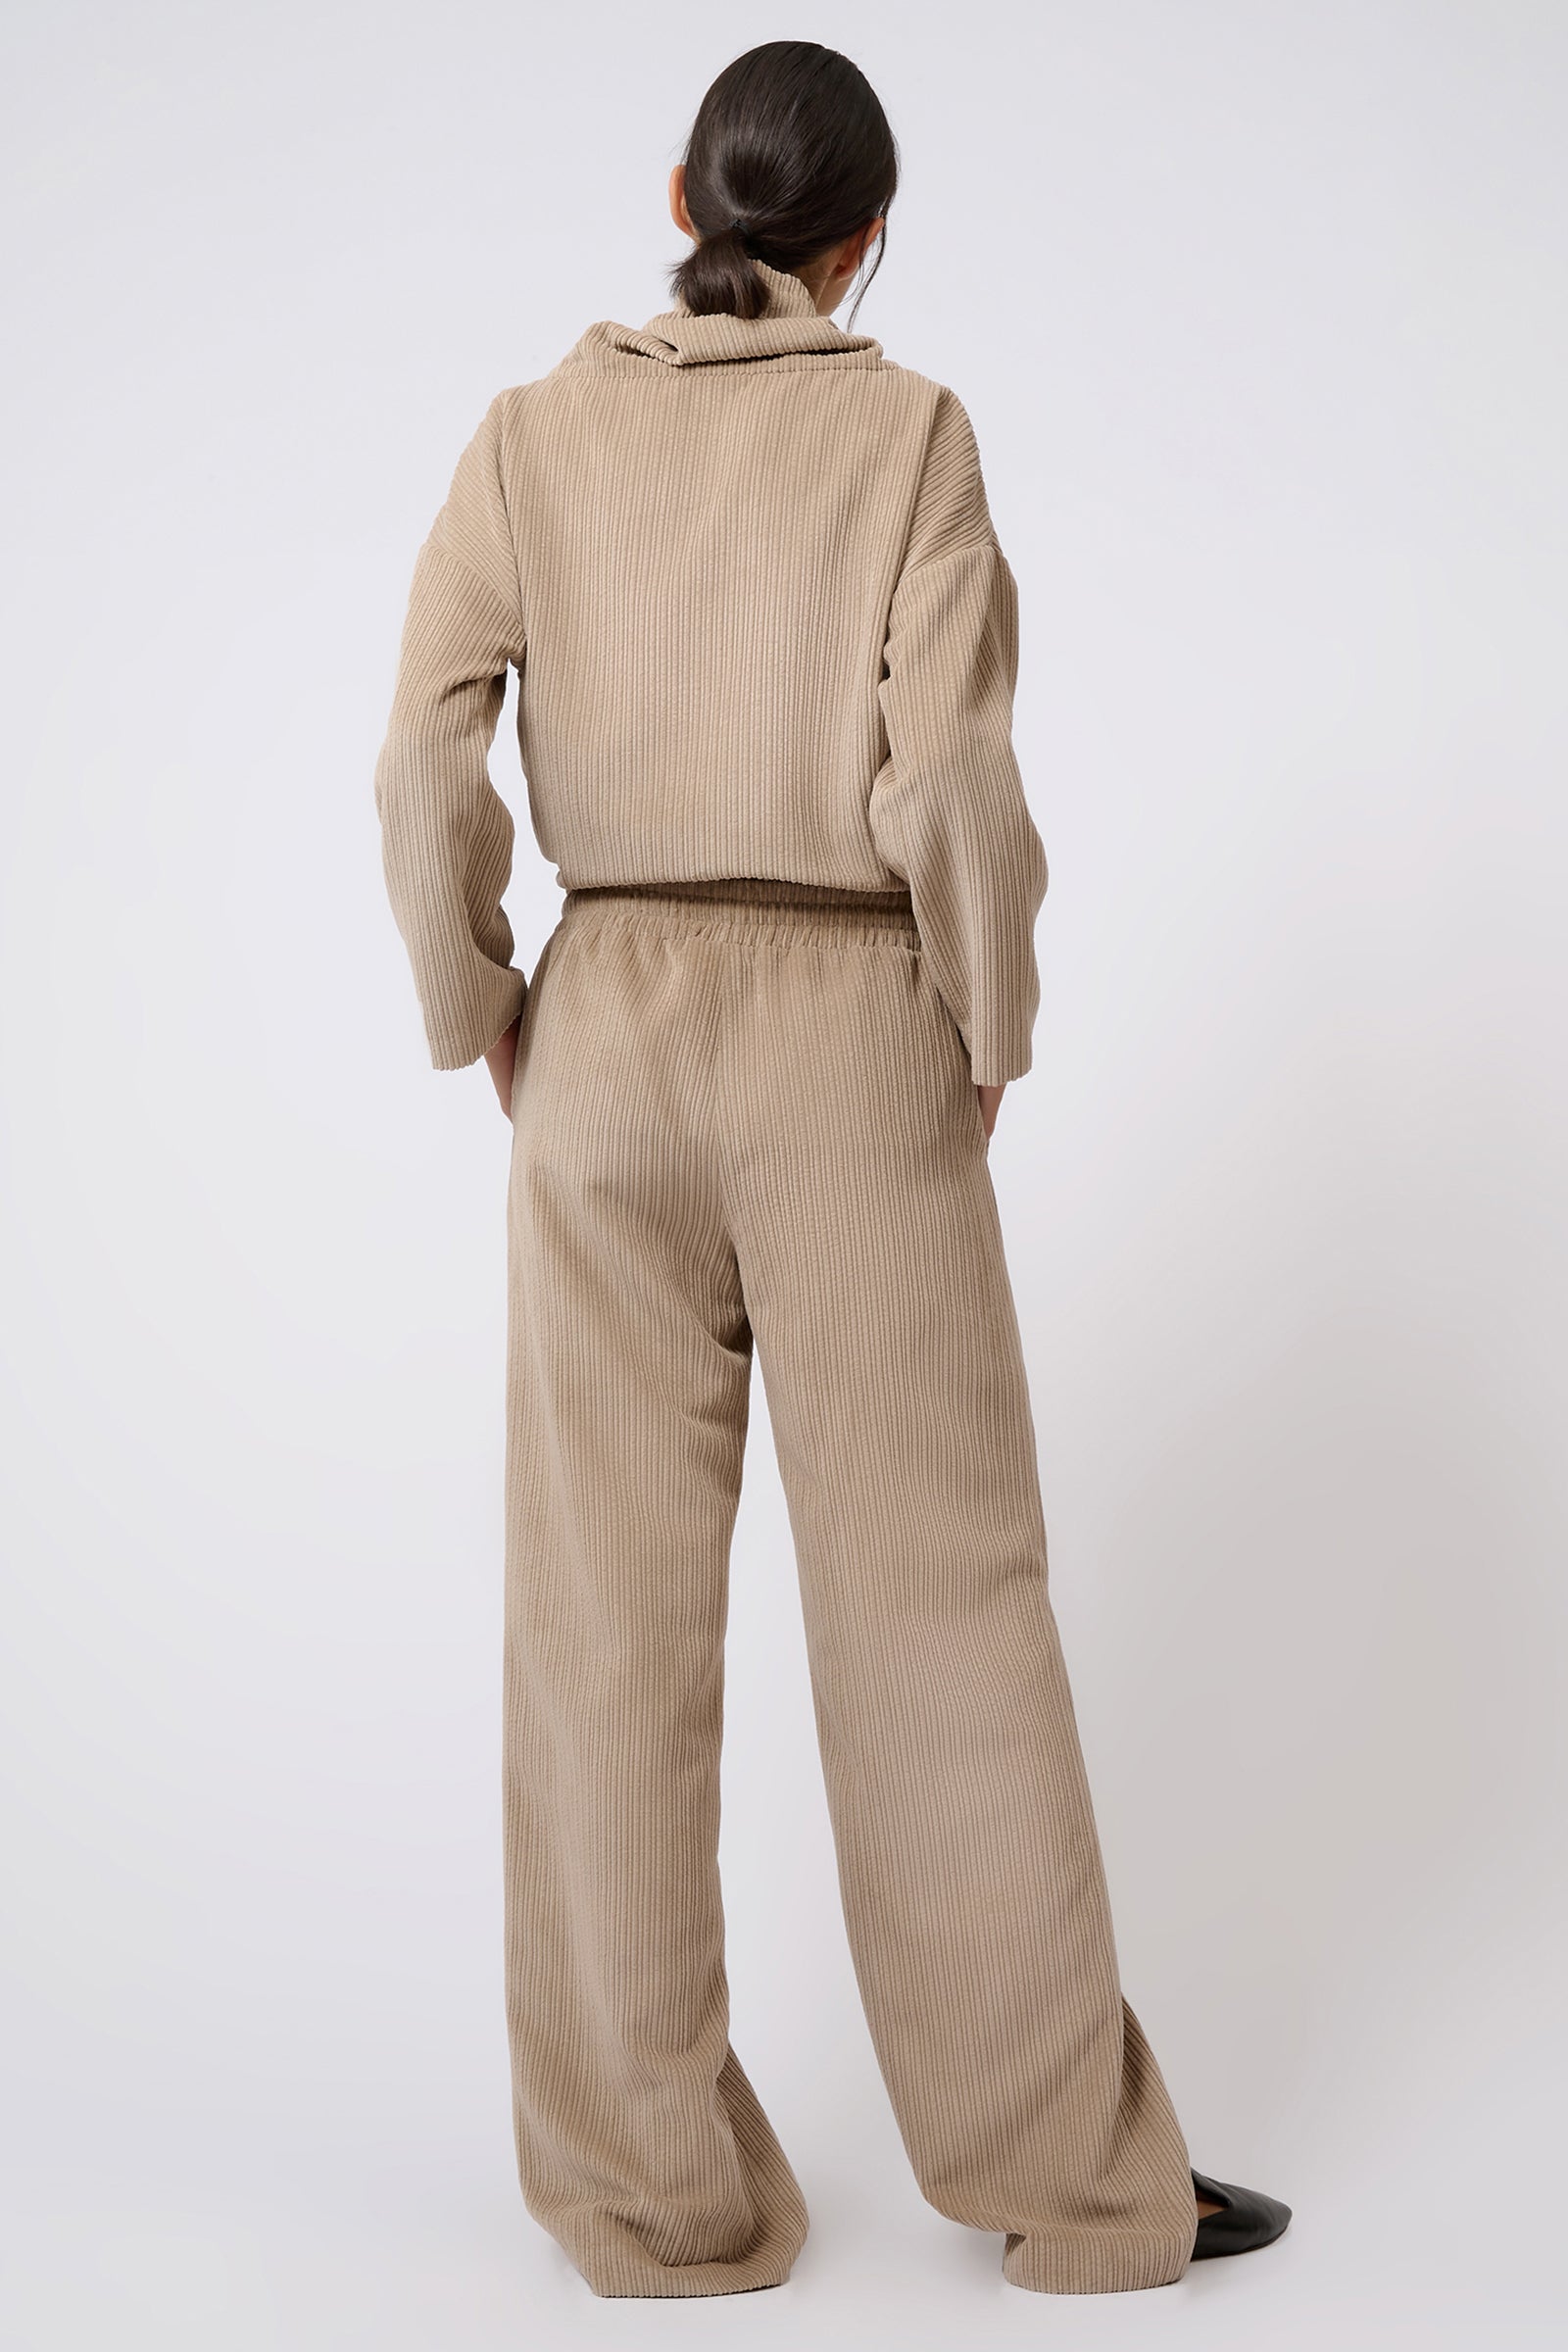 Kal Rieman Debbie Drawstring Pant in Beige on Model with Hands in Pockets Full Back View